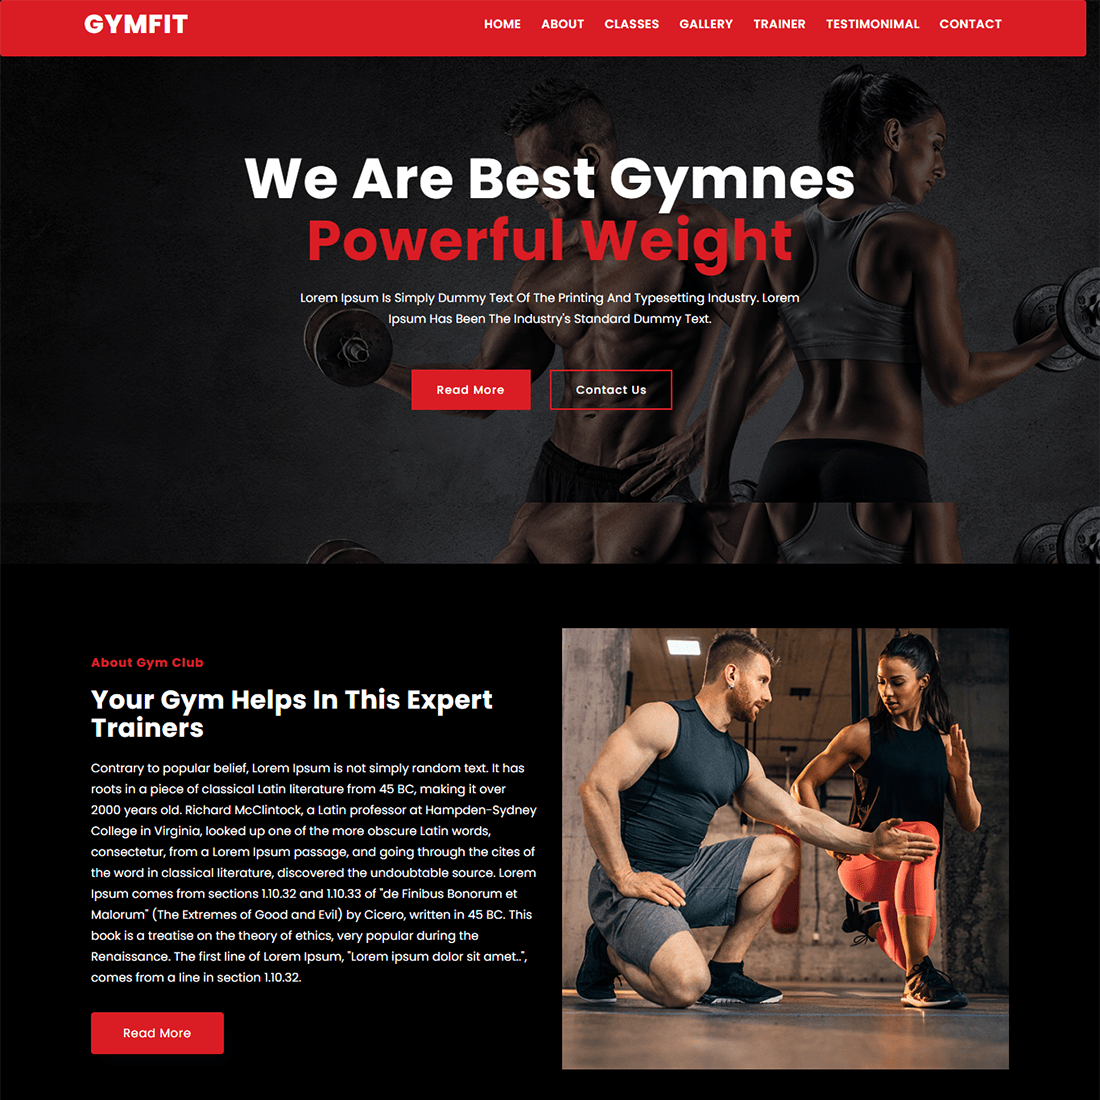 Gymfit Gym & Fitness Website Theme preview image.